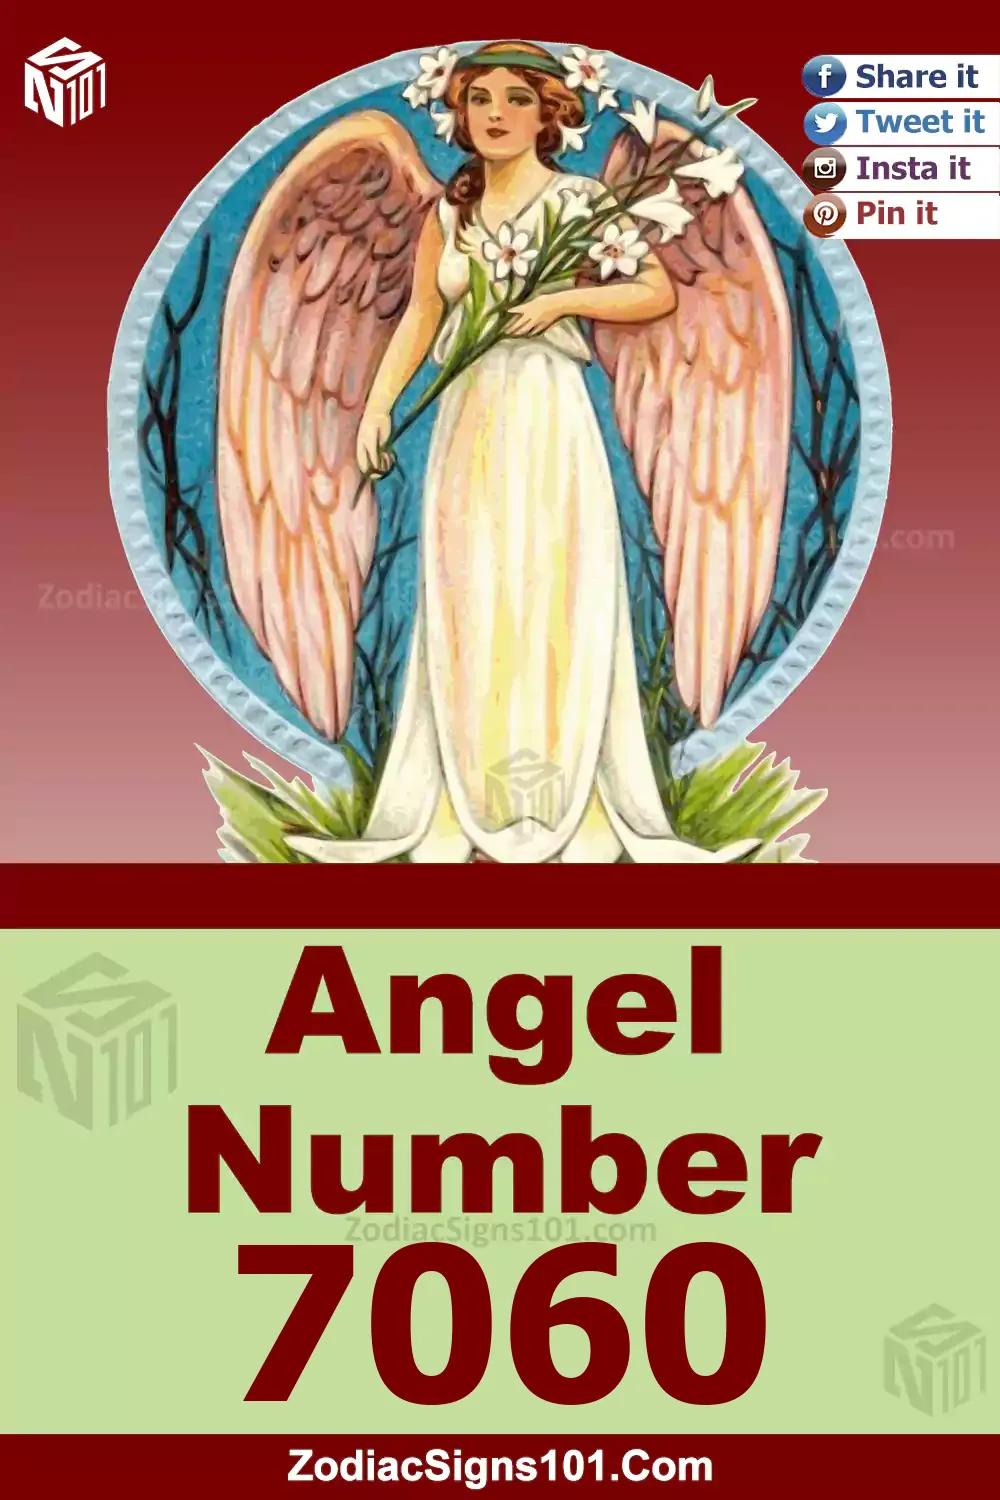 7060 Angel Number Meaning